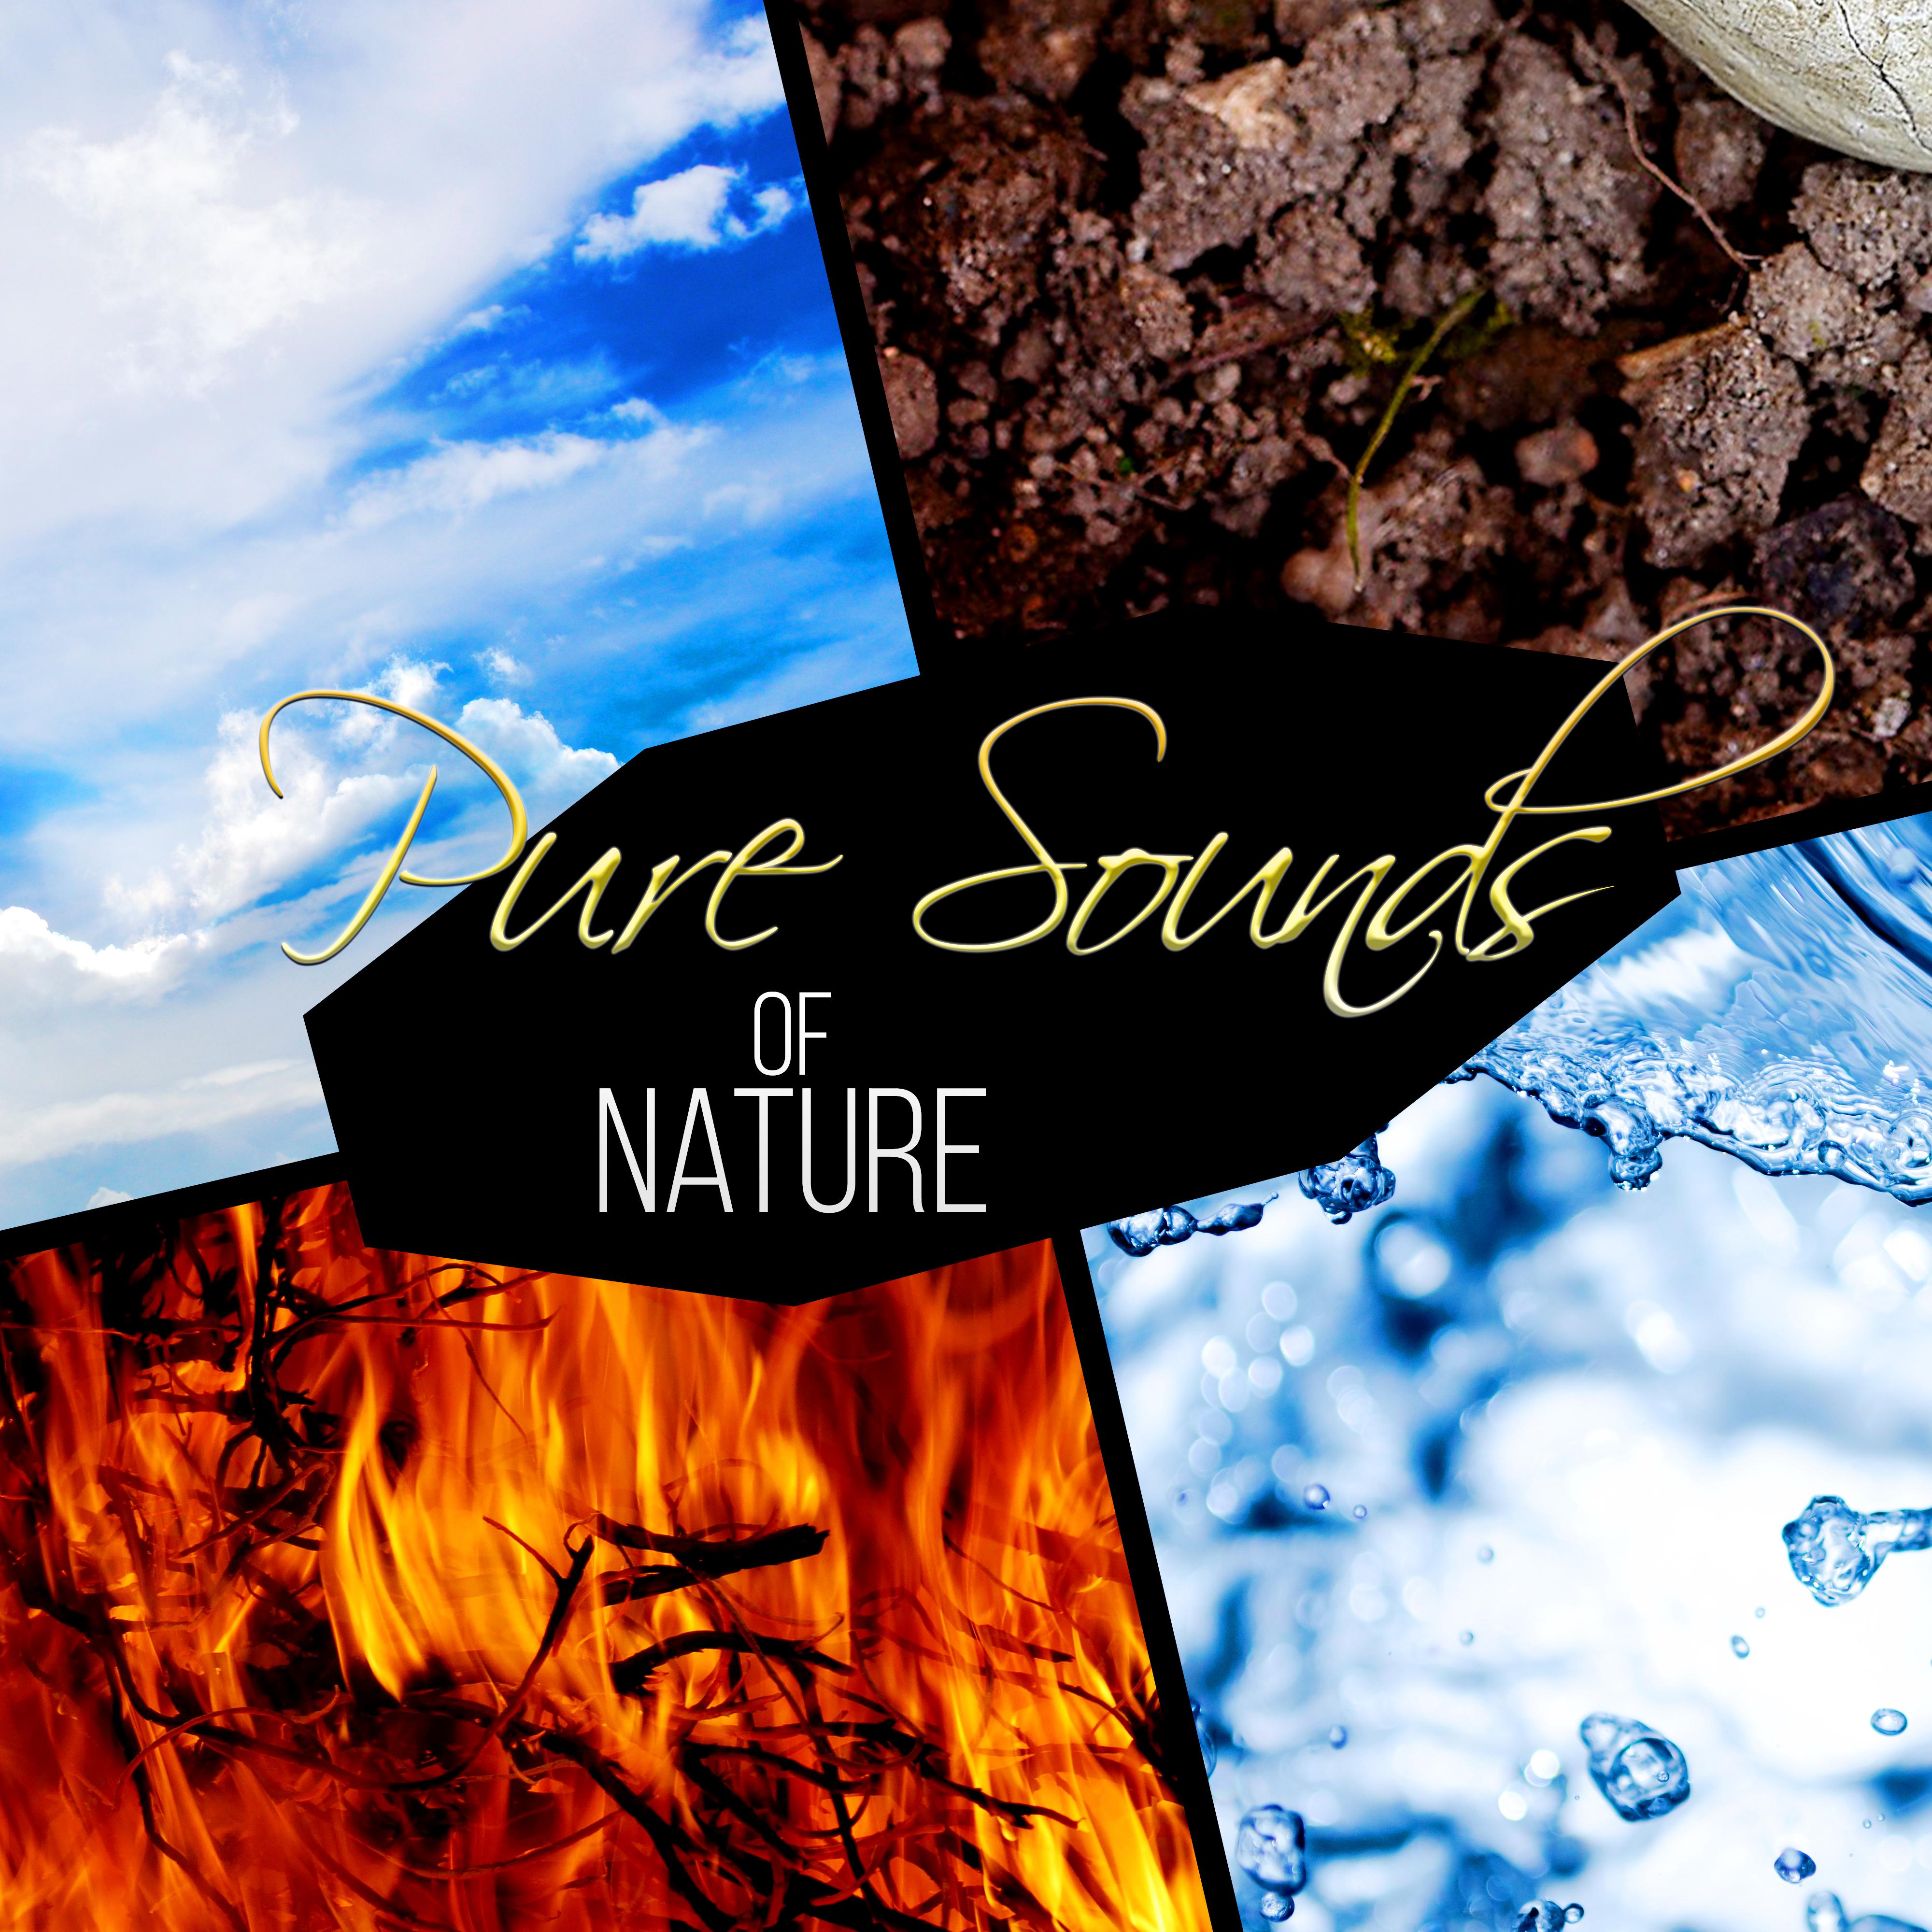 Pure Sounds of Nature – Relaxing Sounds Ocean Waves, Birds Sing, Crickets, Rain, Thunderstorm, Wind, Waterfalls and River